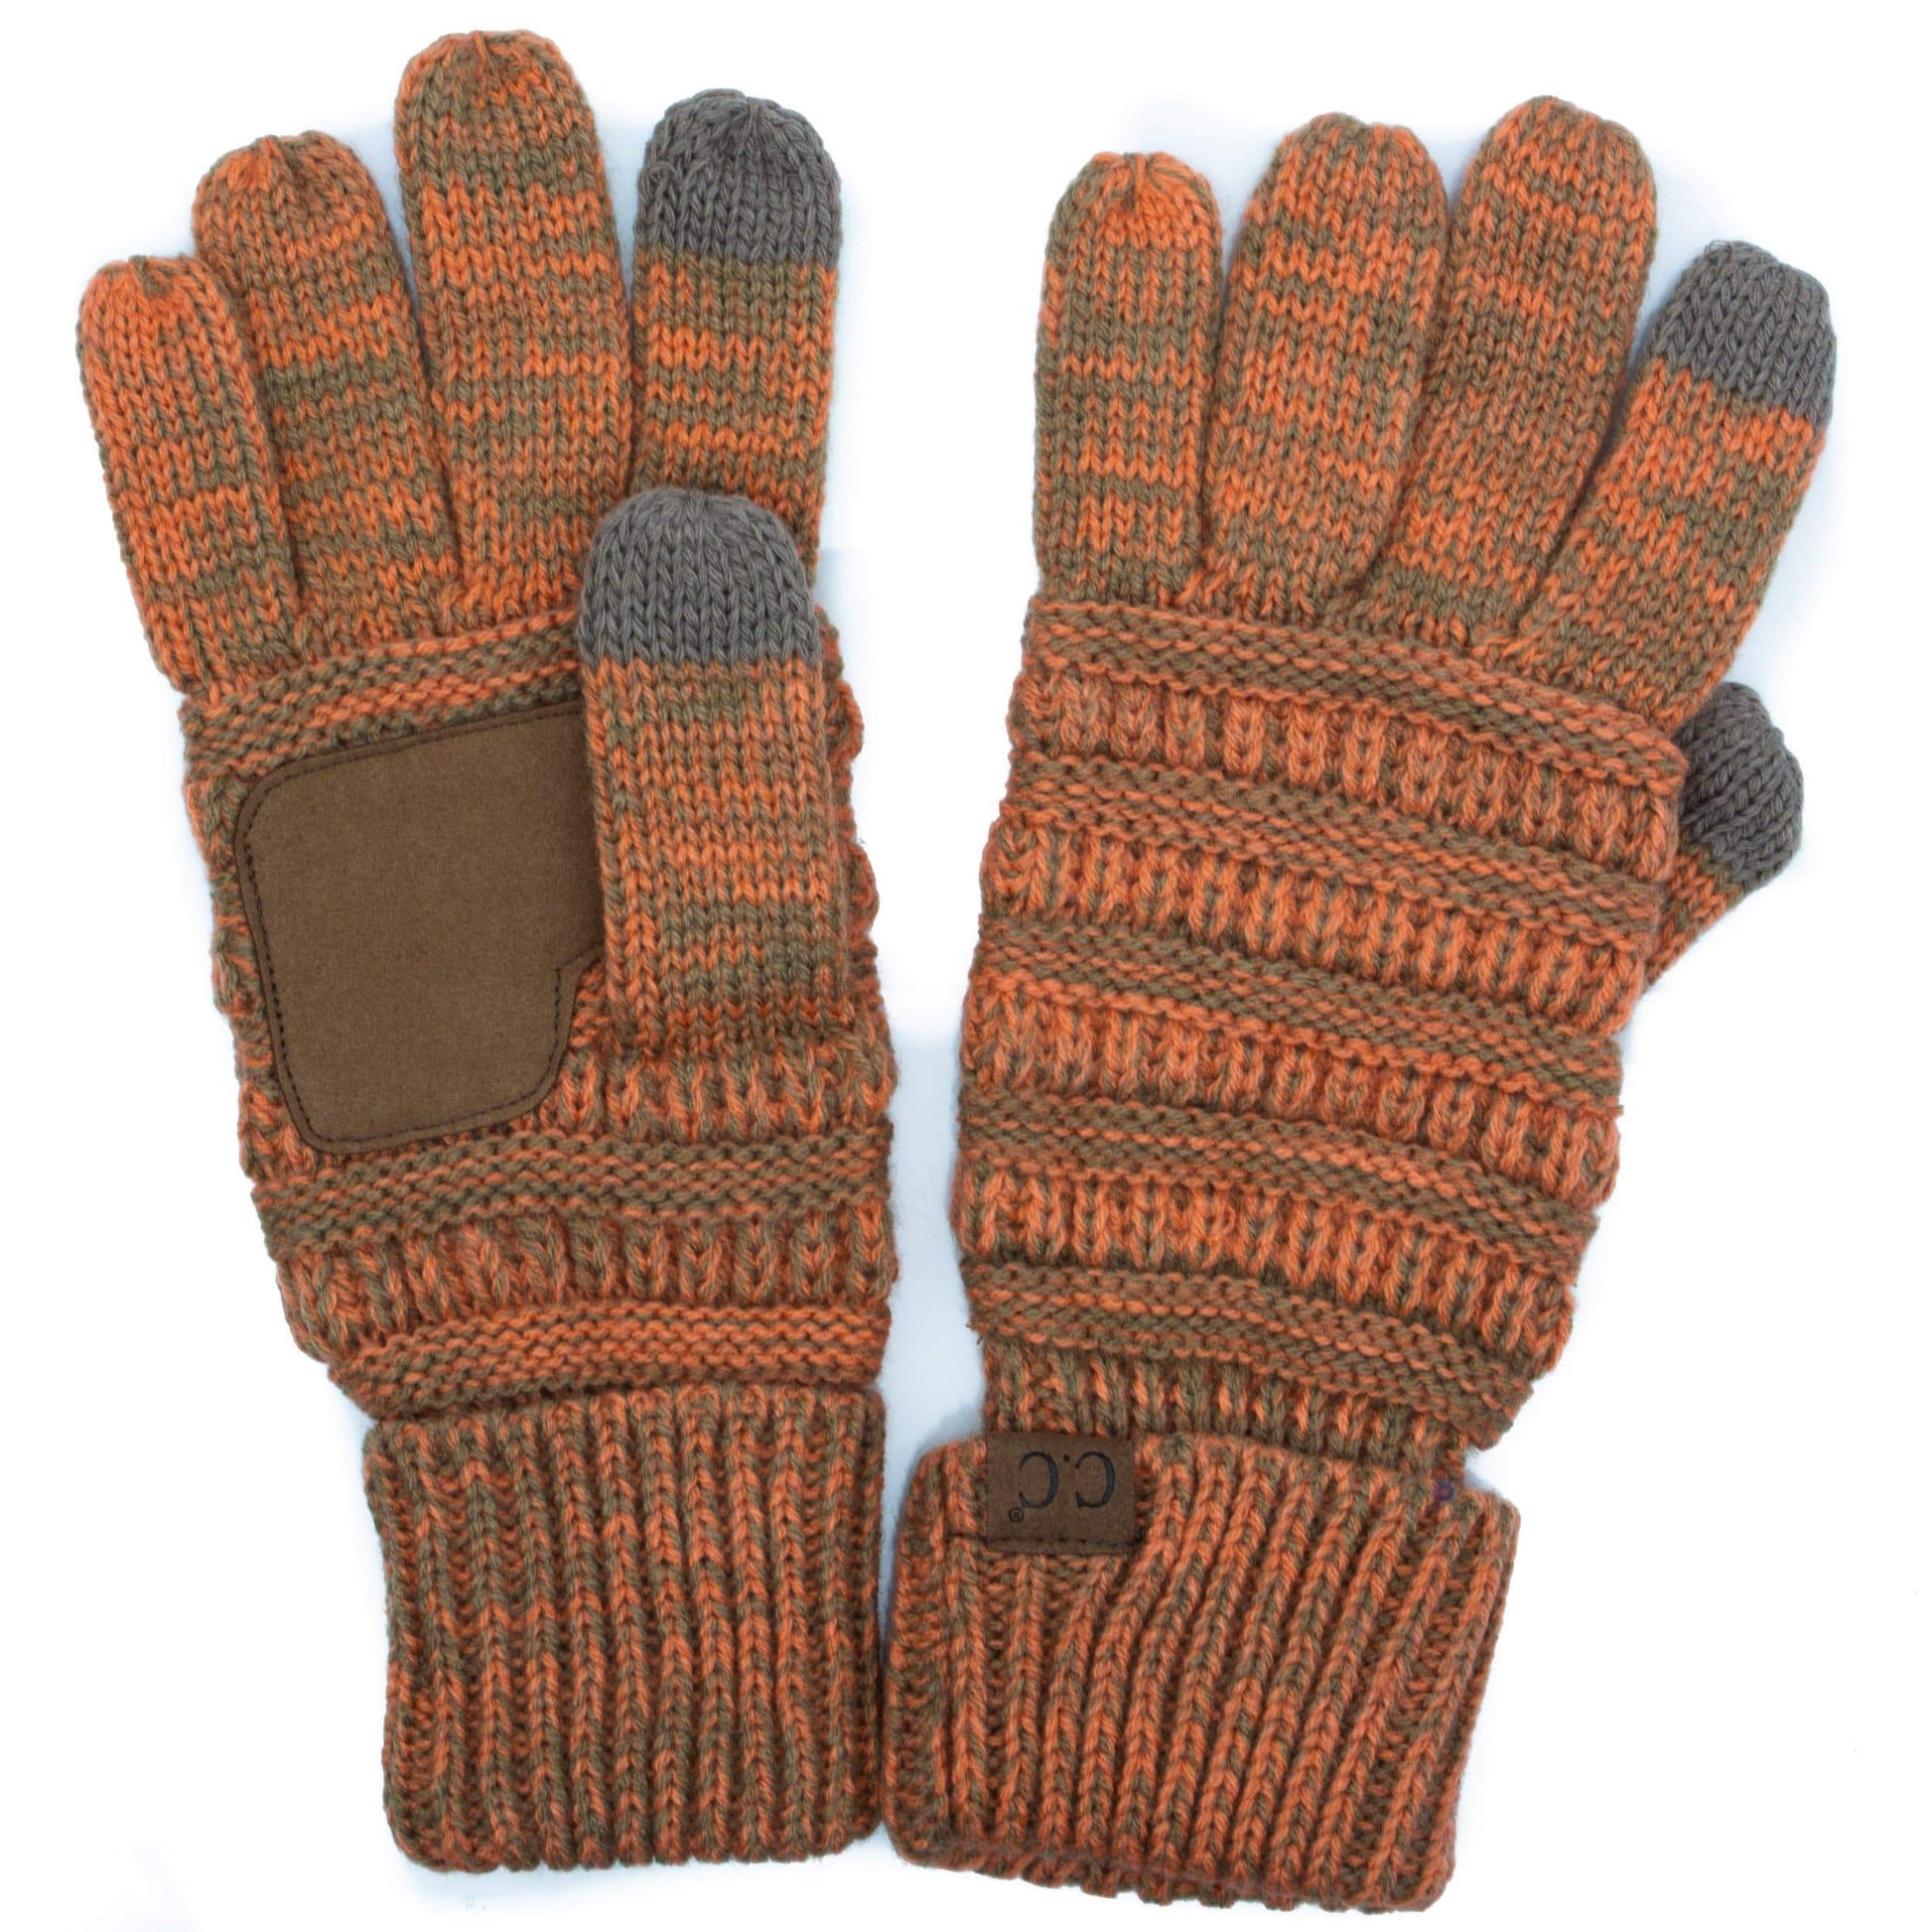 C.C Apparel Orange/Taupe C.C Unisex Cable Knit Winter Warm Anti-Slip Two-Toned Touchscreen Texting Gloves